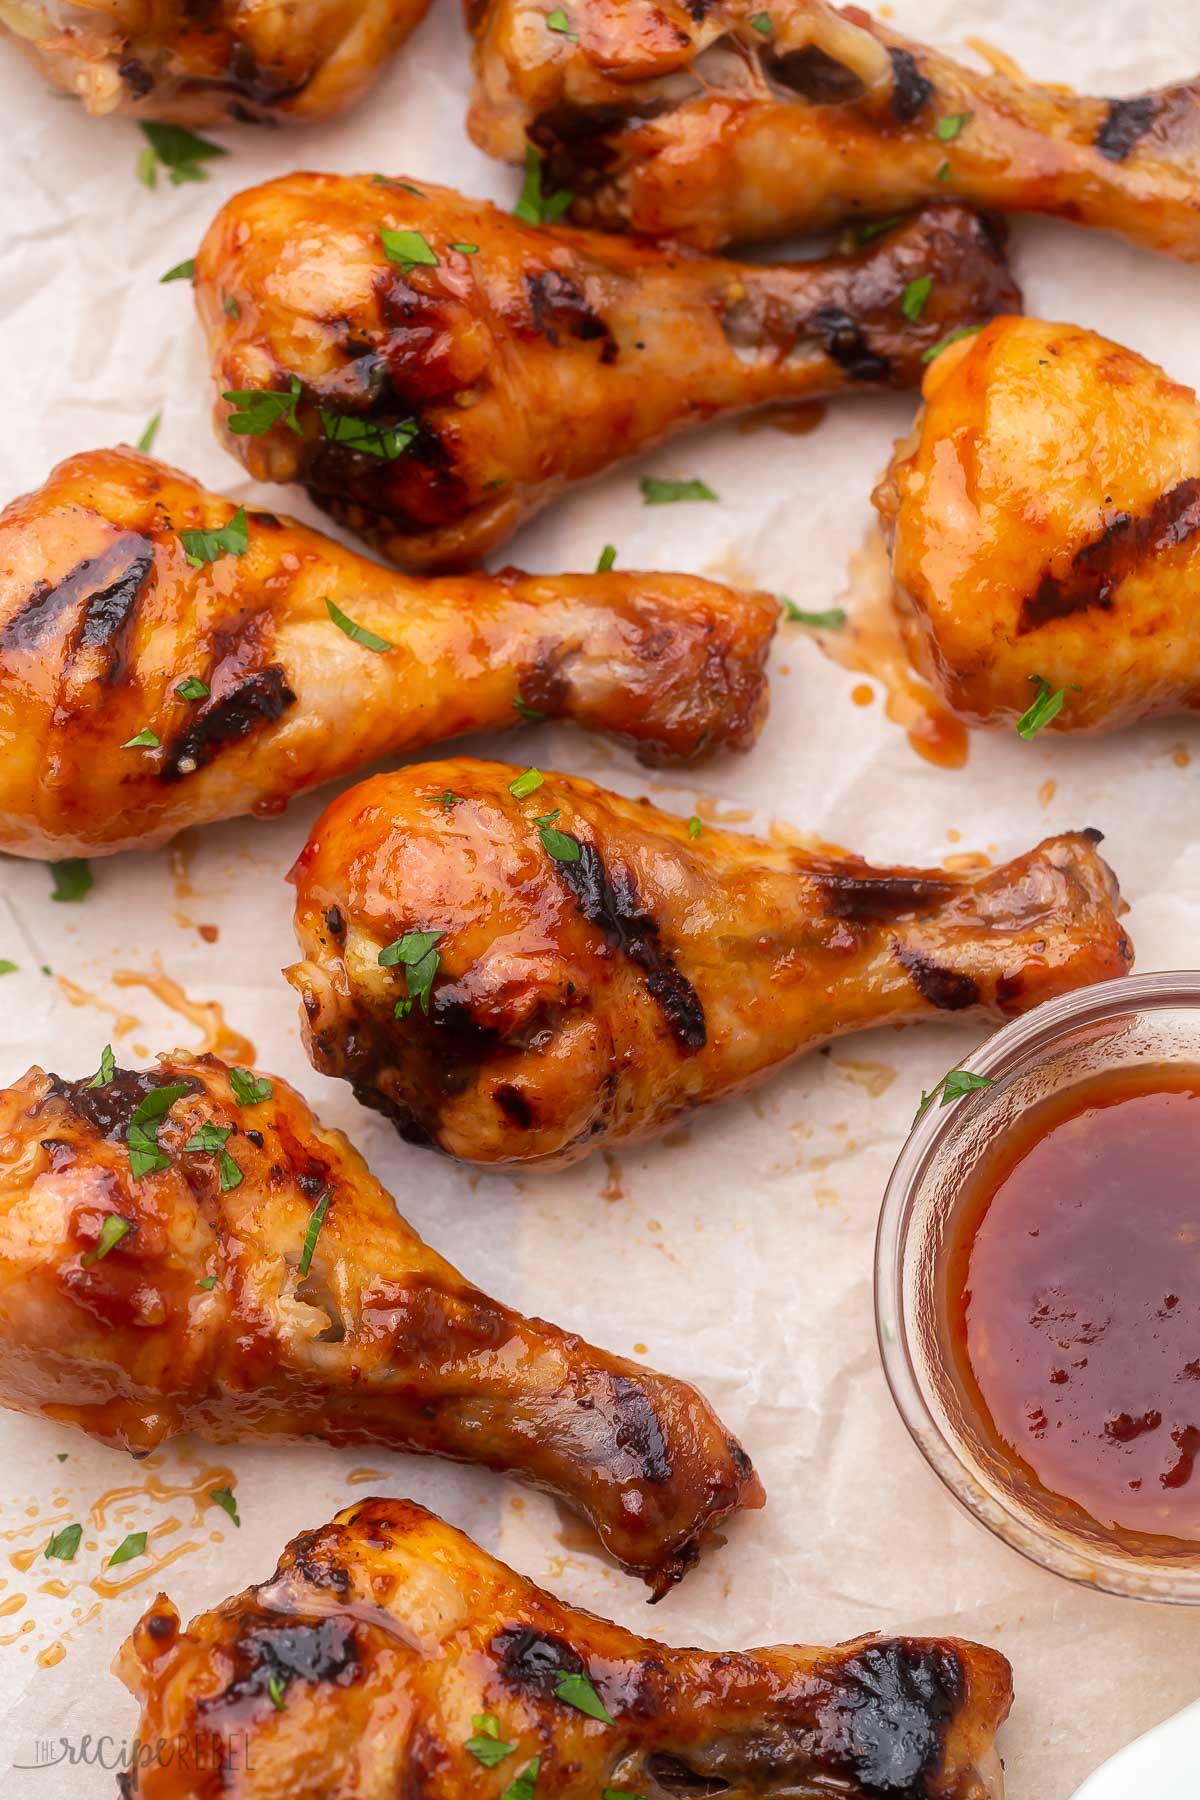 Top view of grilled chicken drumsticks with maple glaze in a glass bowl.